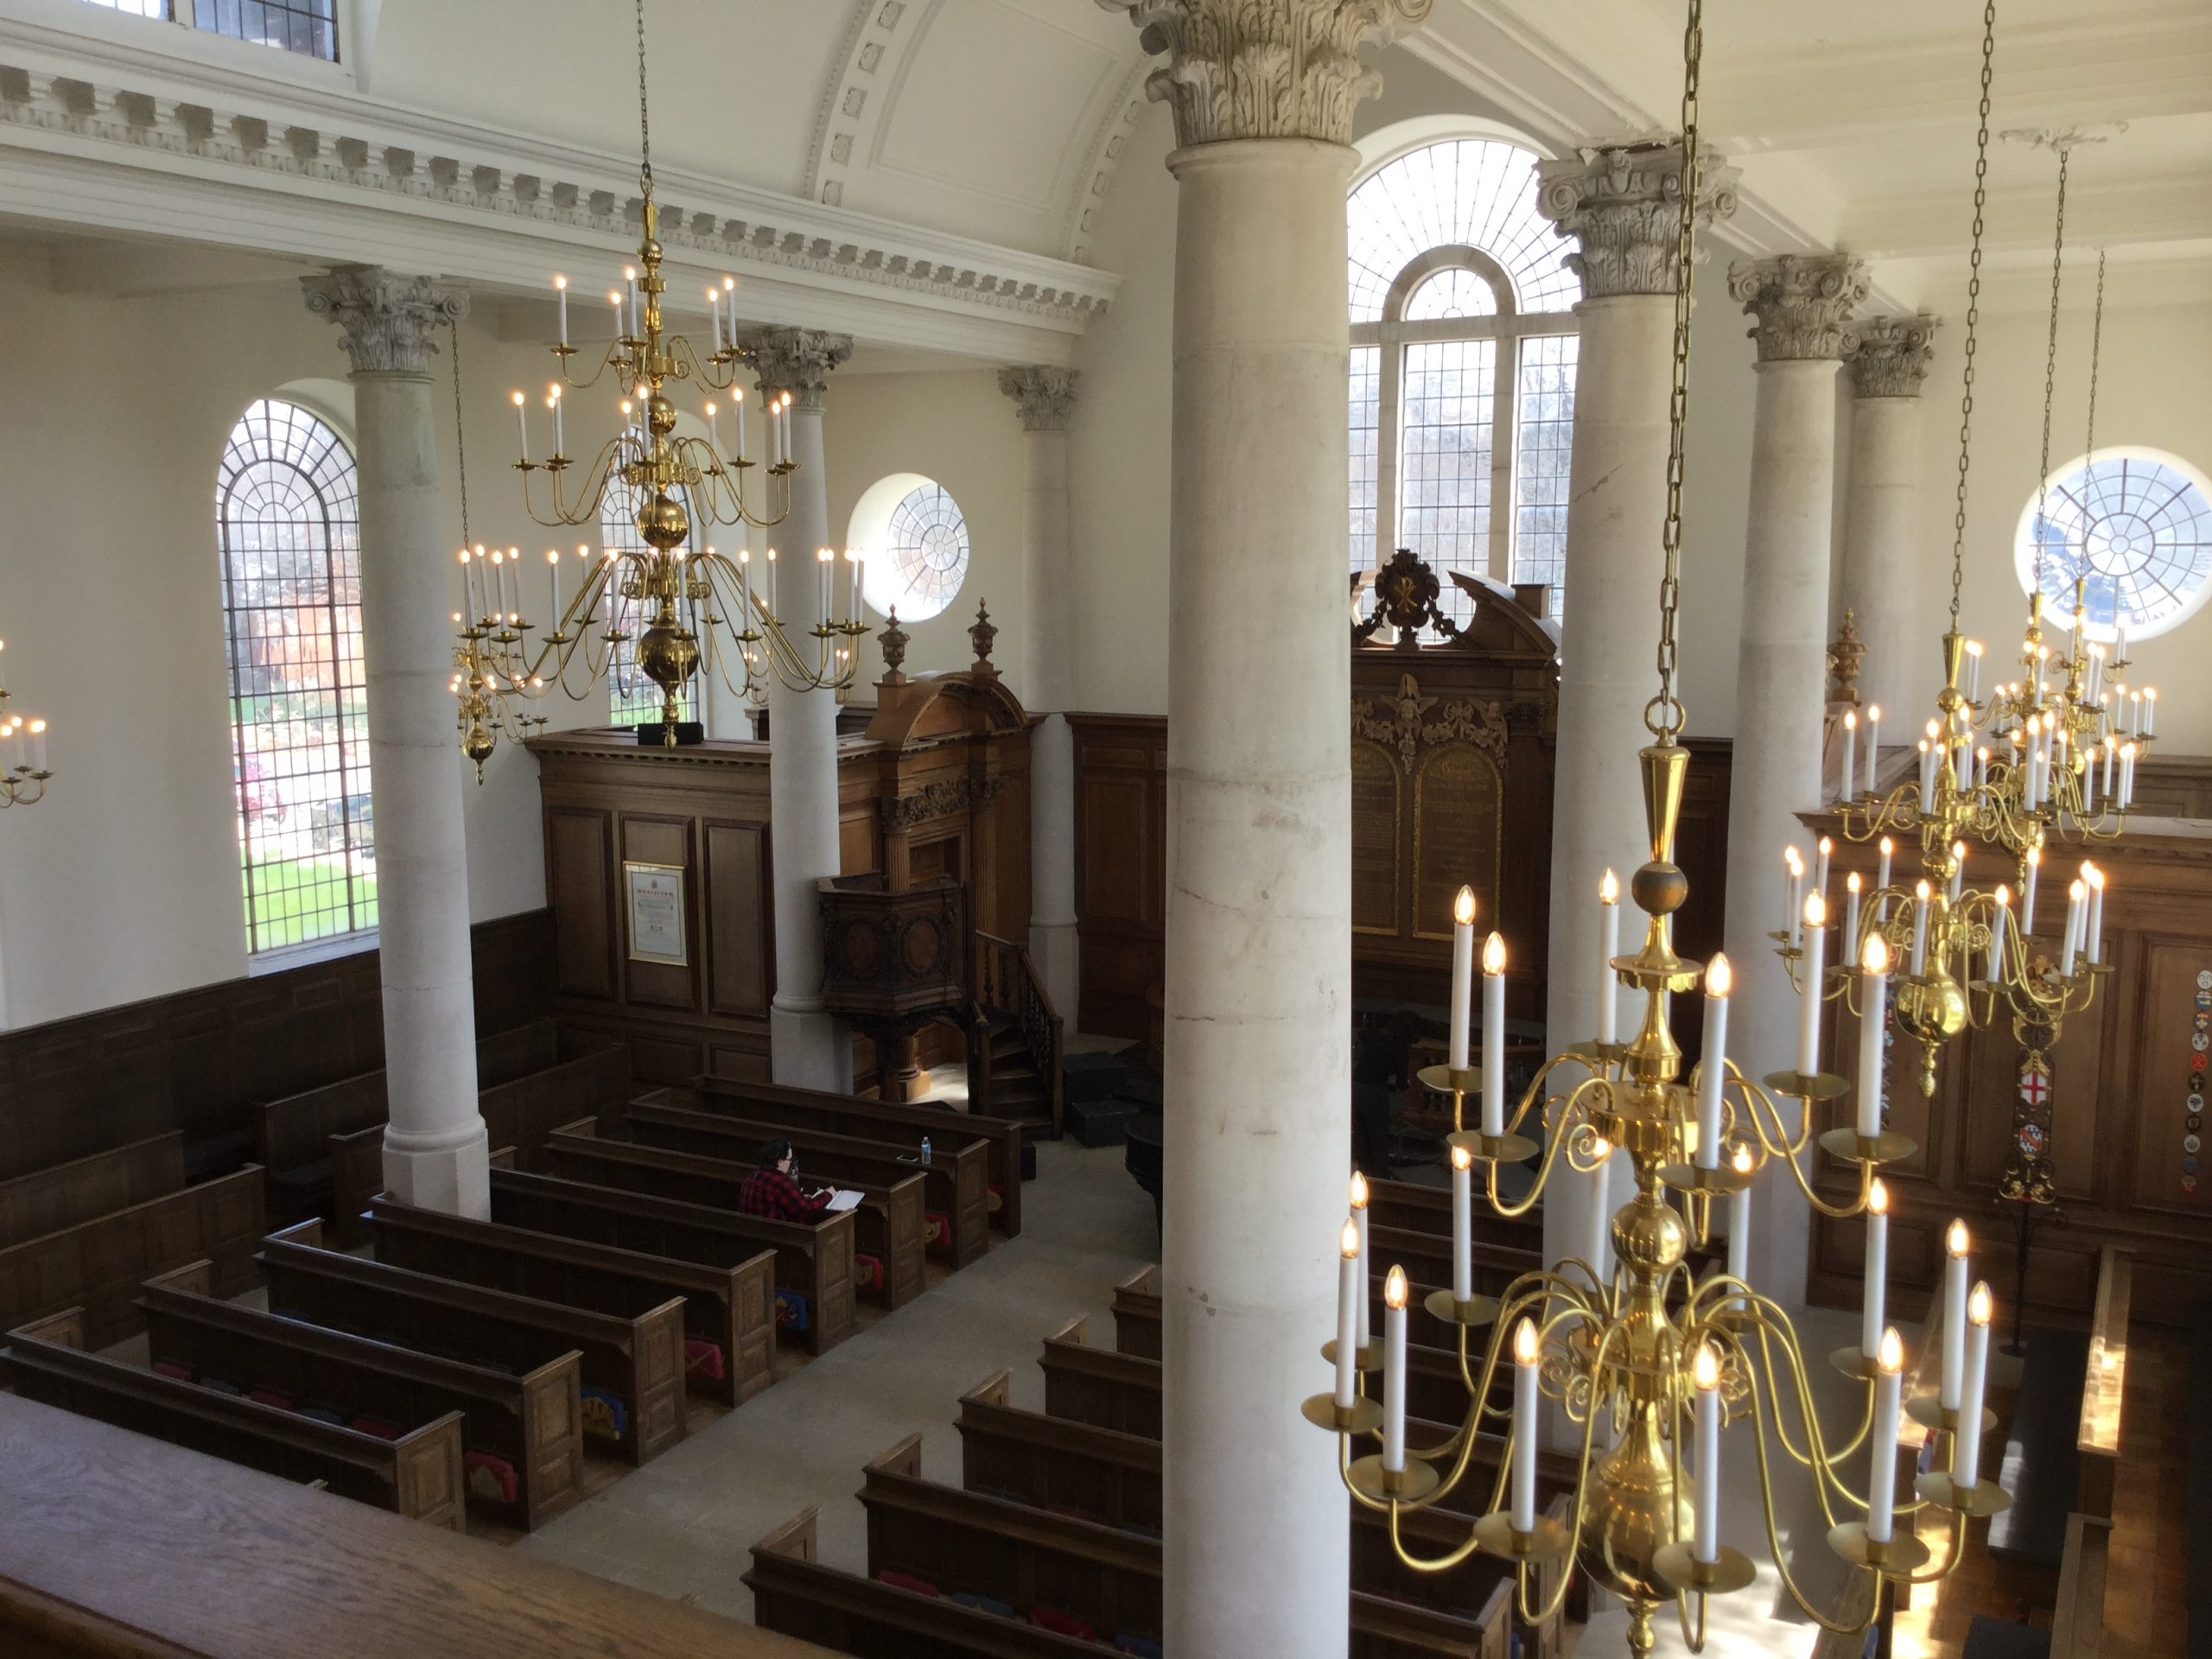 The beautifully restored interior of the church as it looks today